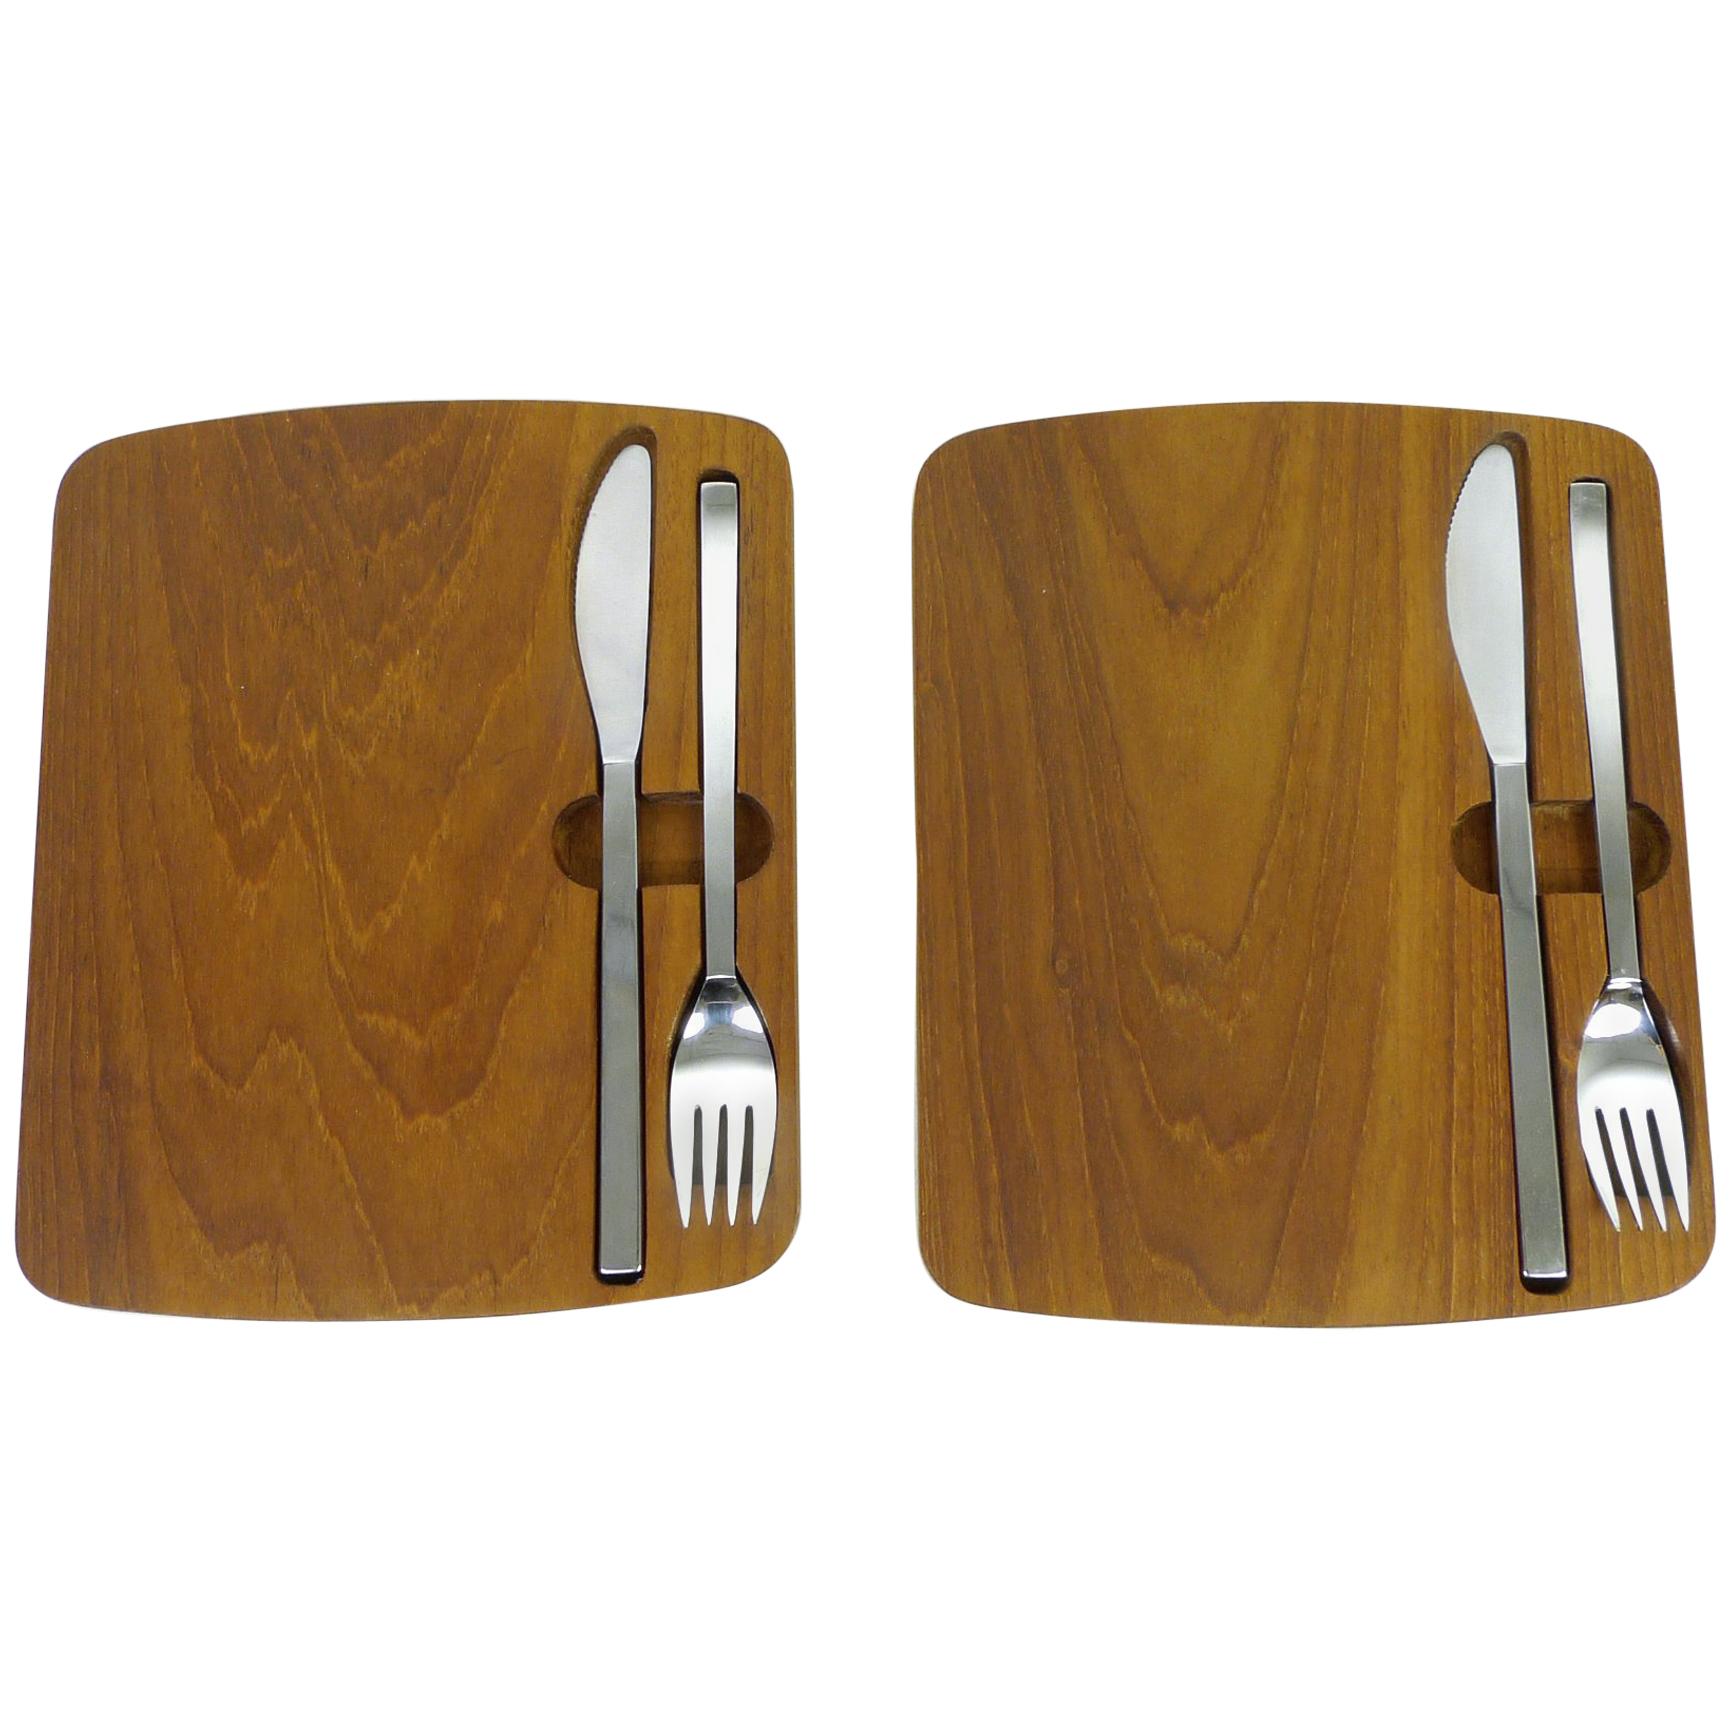 Pair of Teak Picnic Boards with Cutlery from BSF, Germany, 1960s For Sale